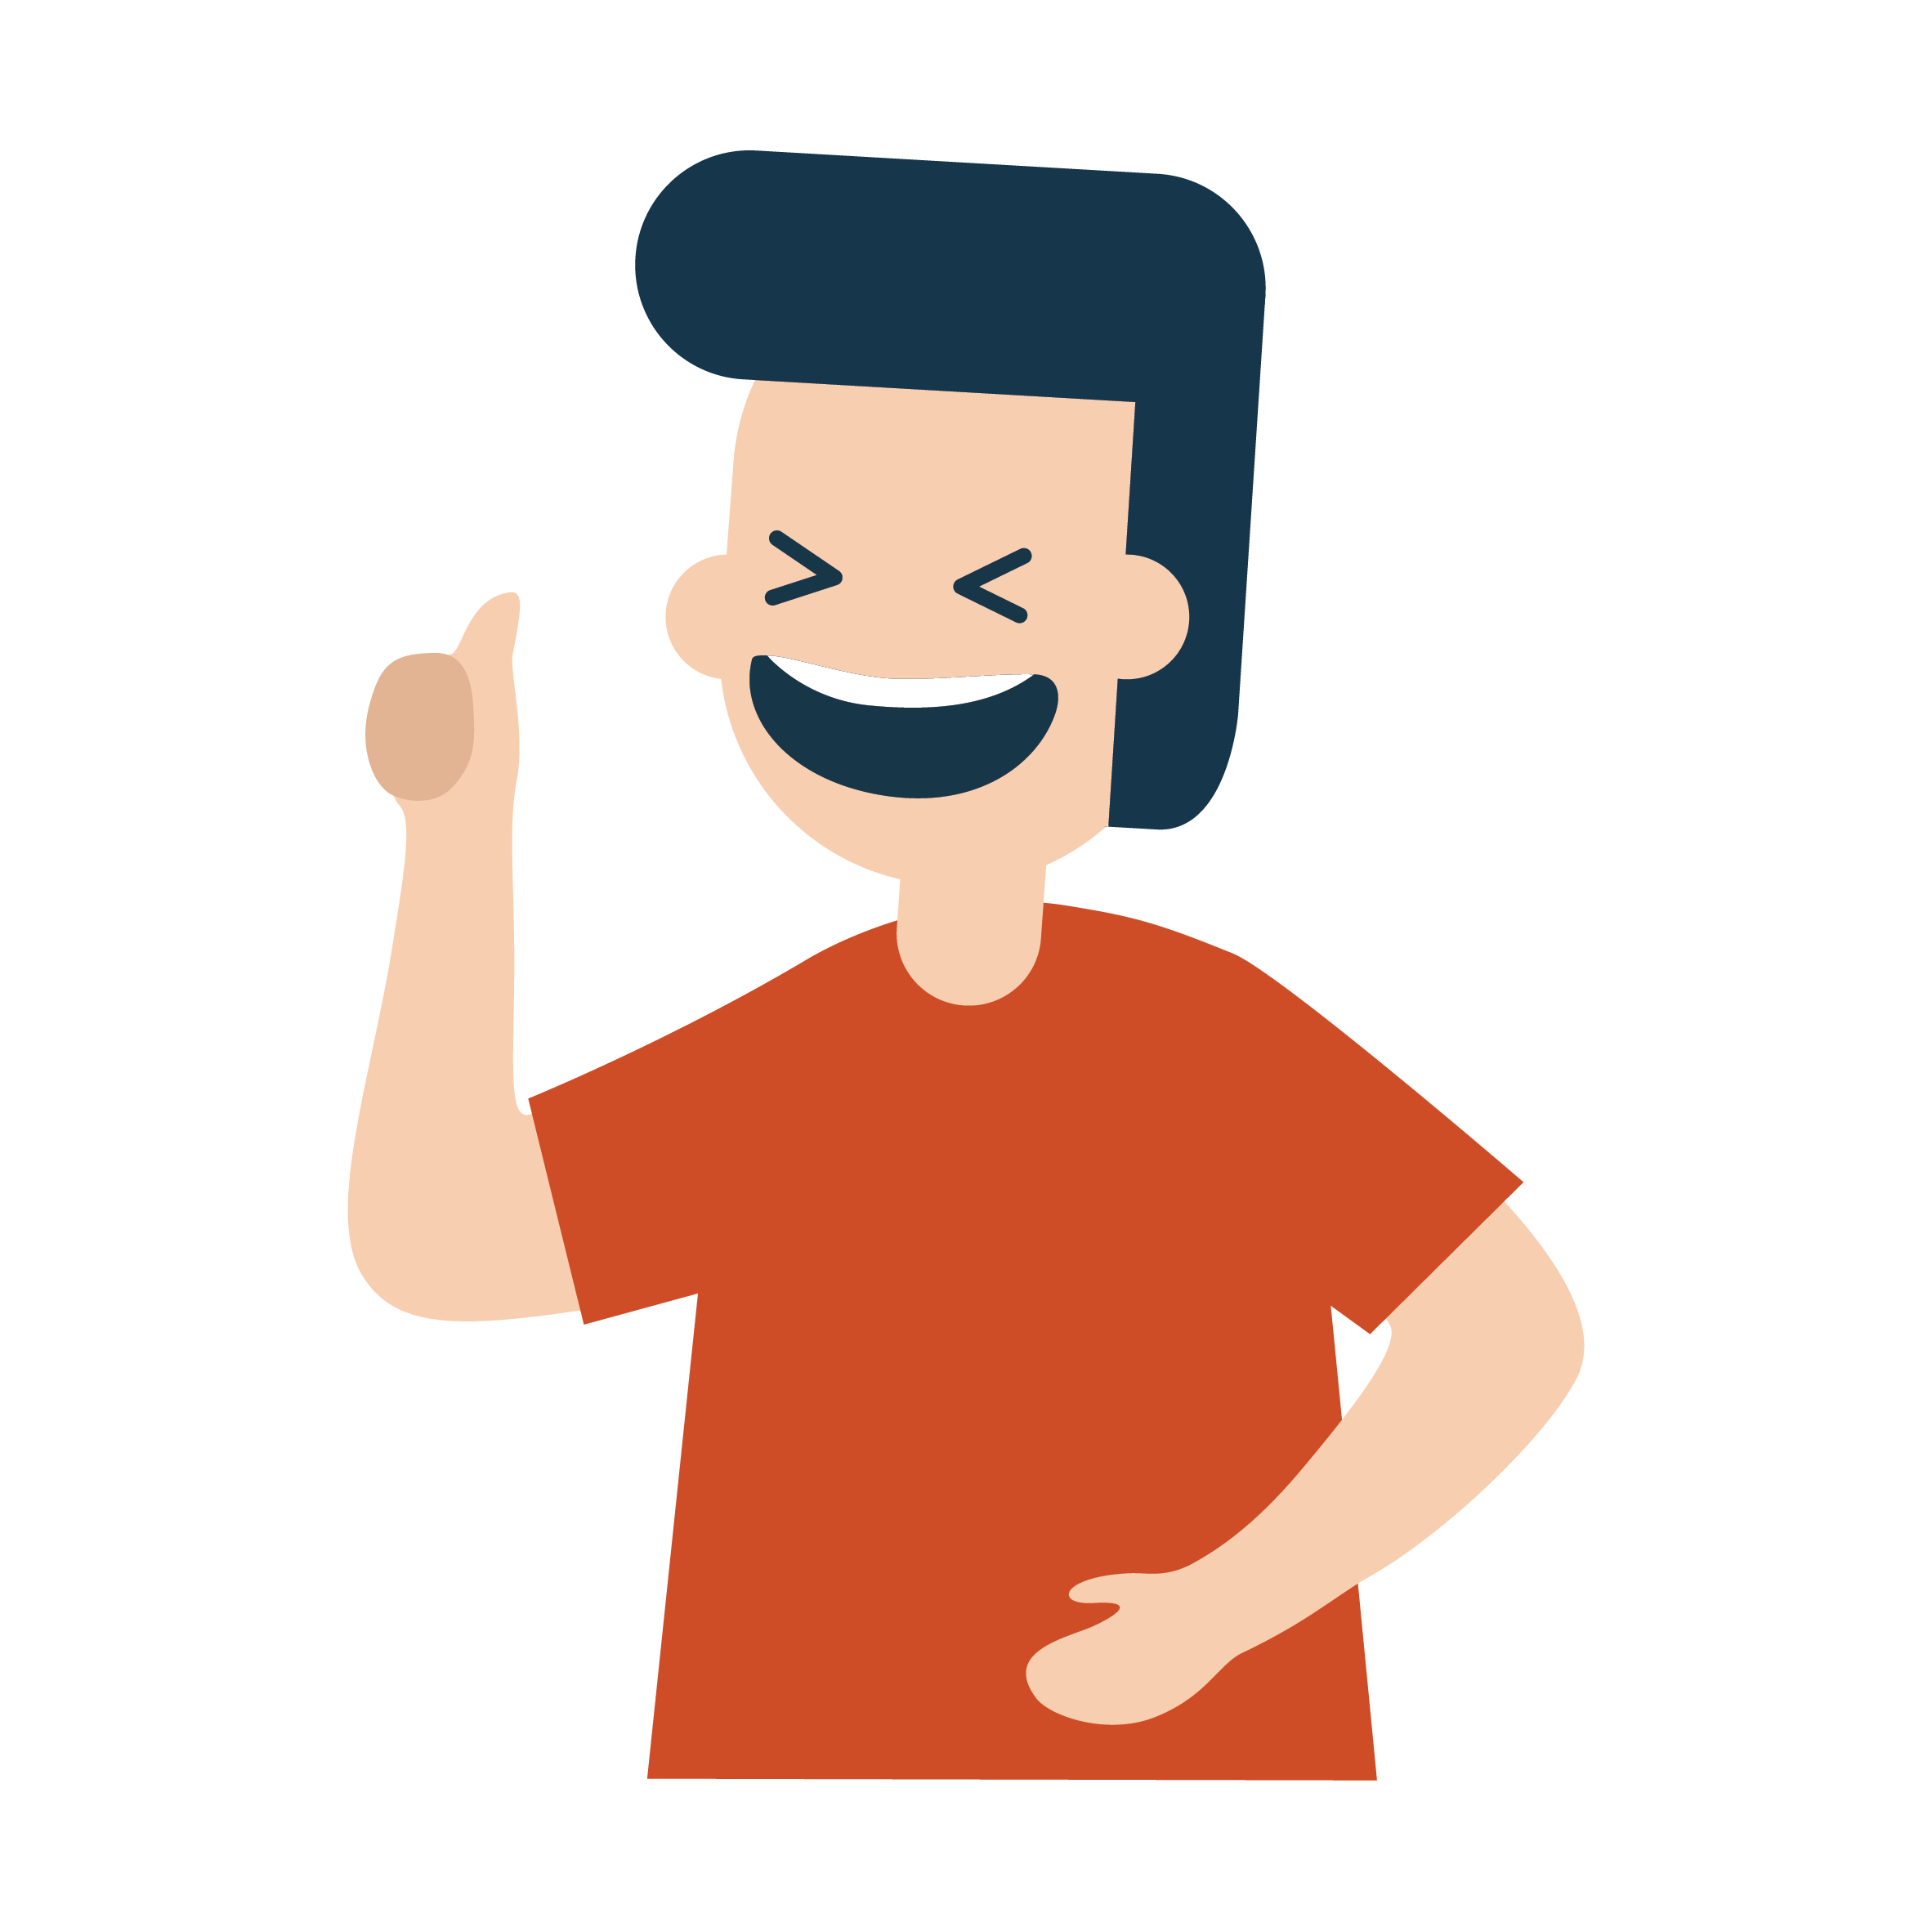 Man with a thumbs up